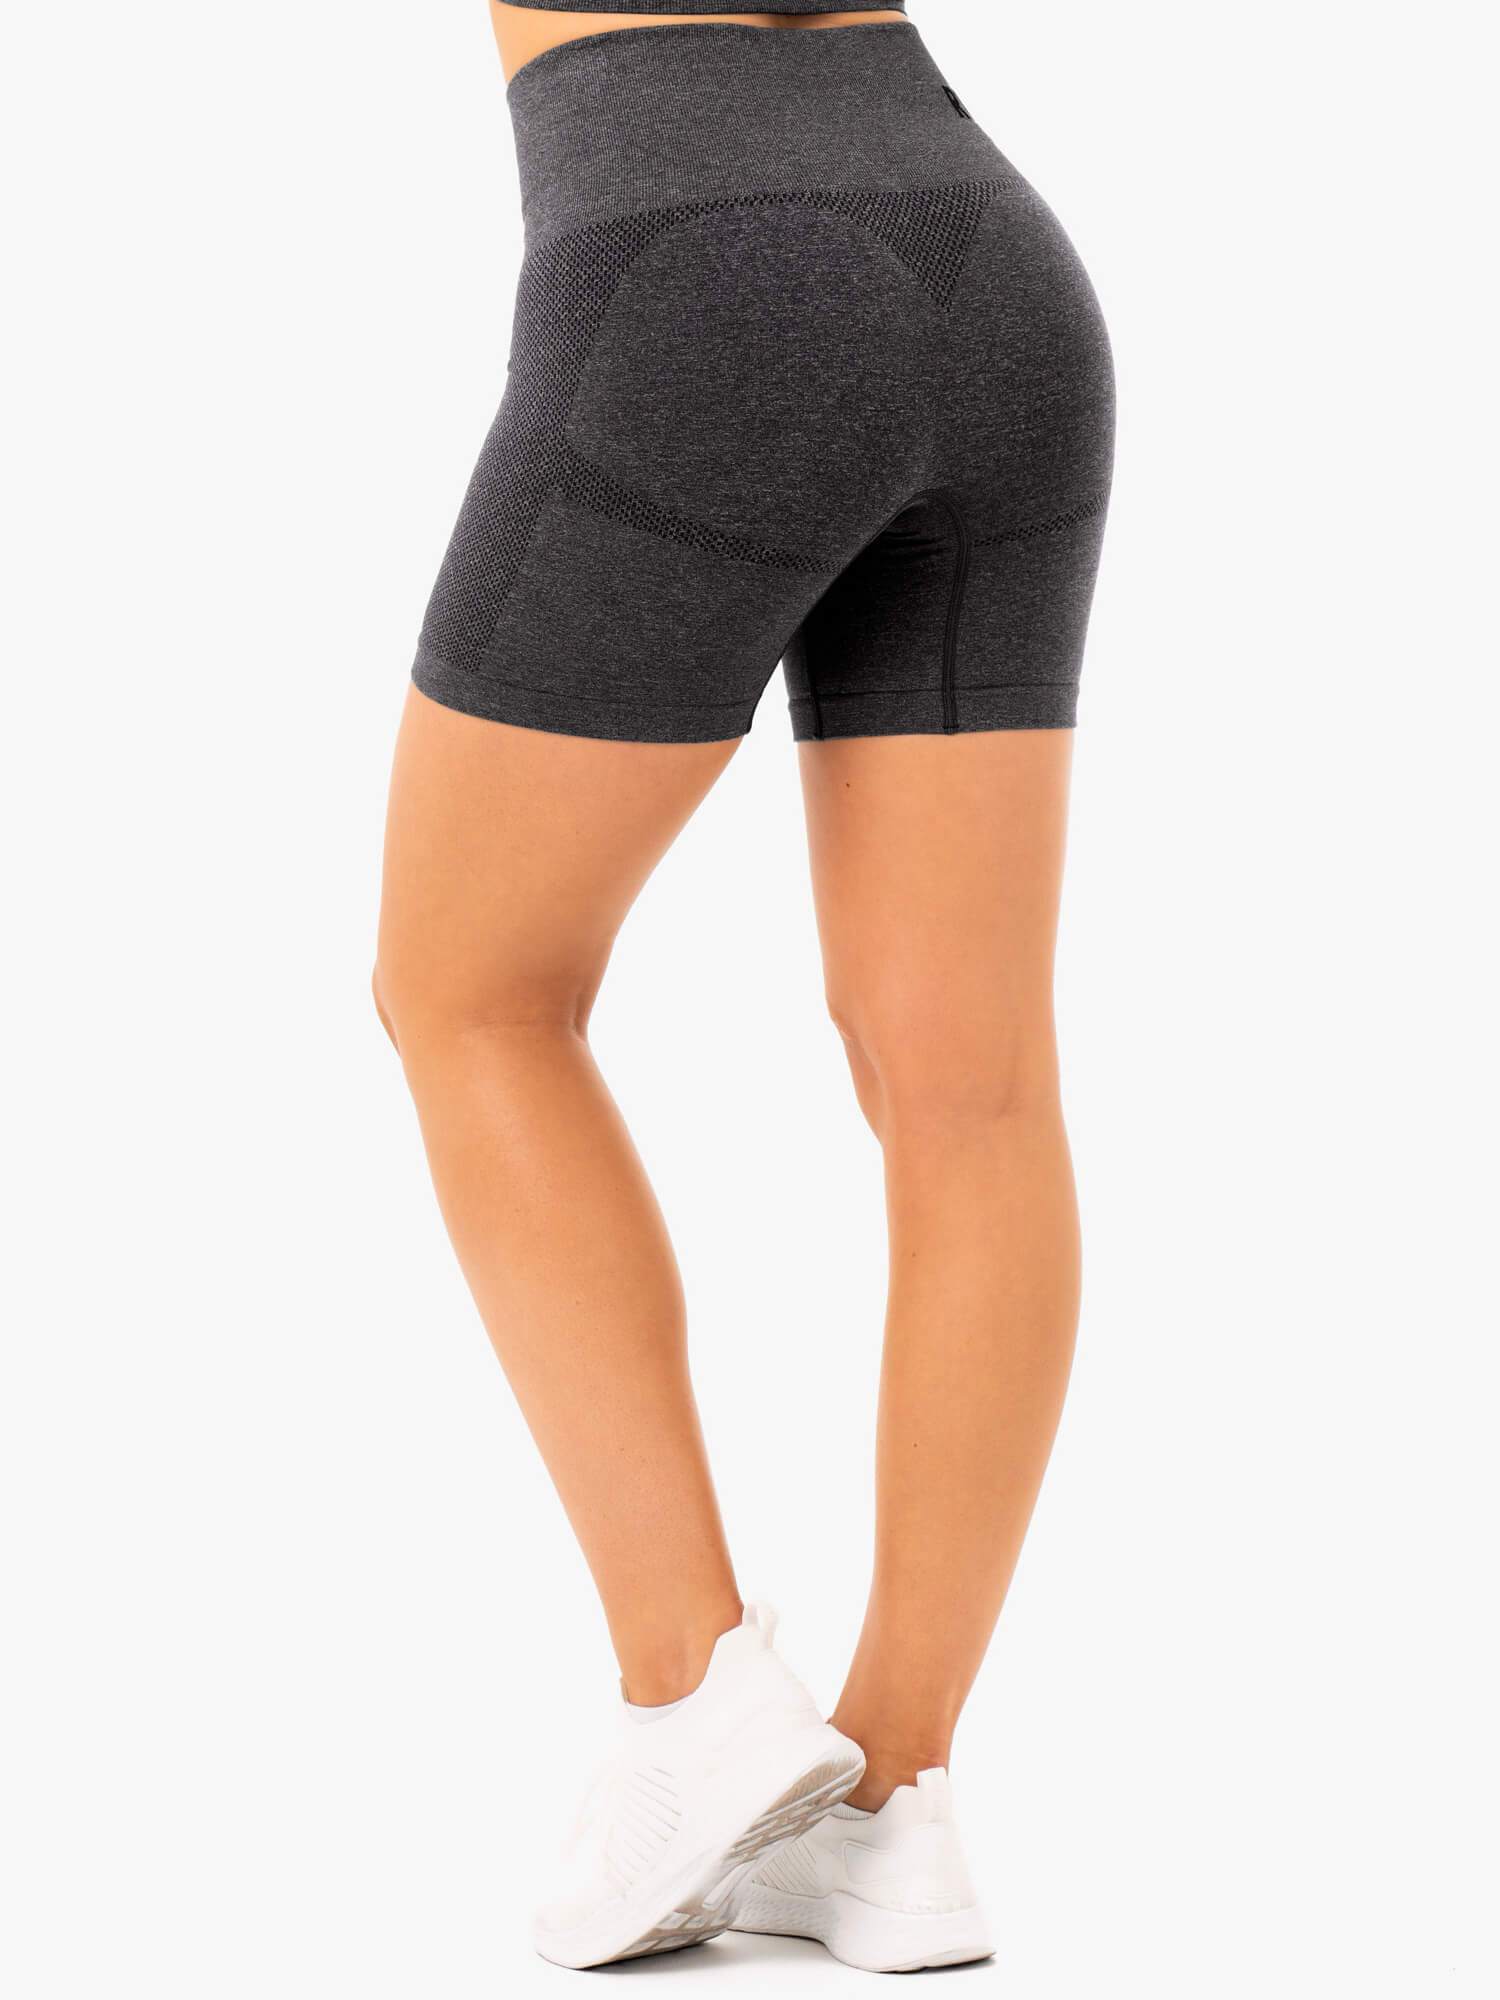 Ryderwear Seamless Staples Shorts Charcoal Marl